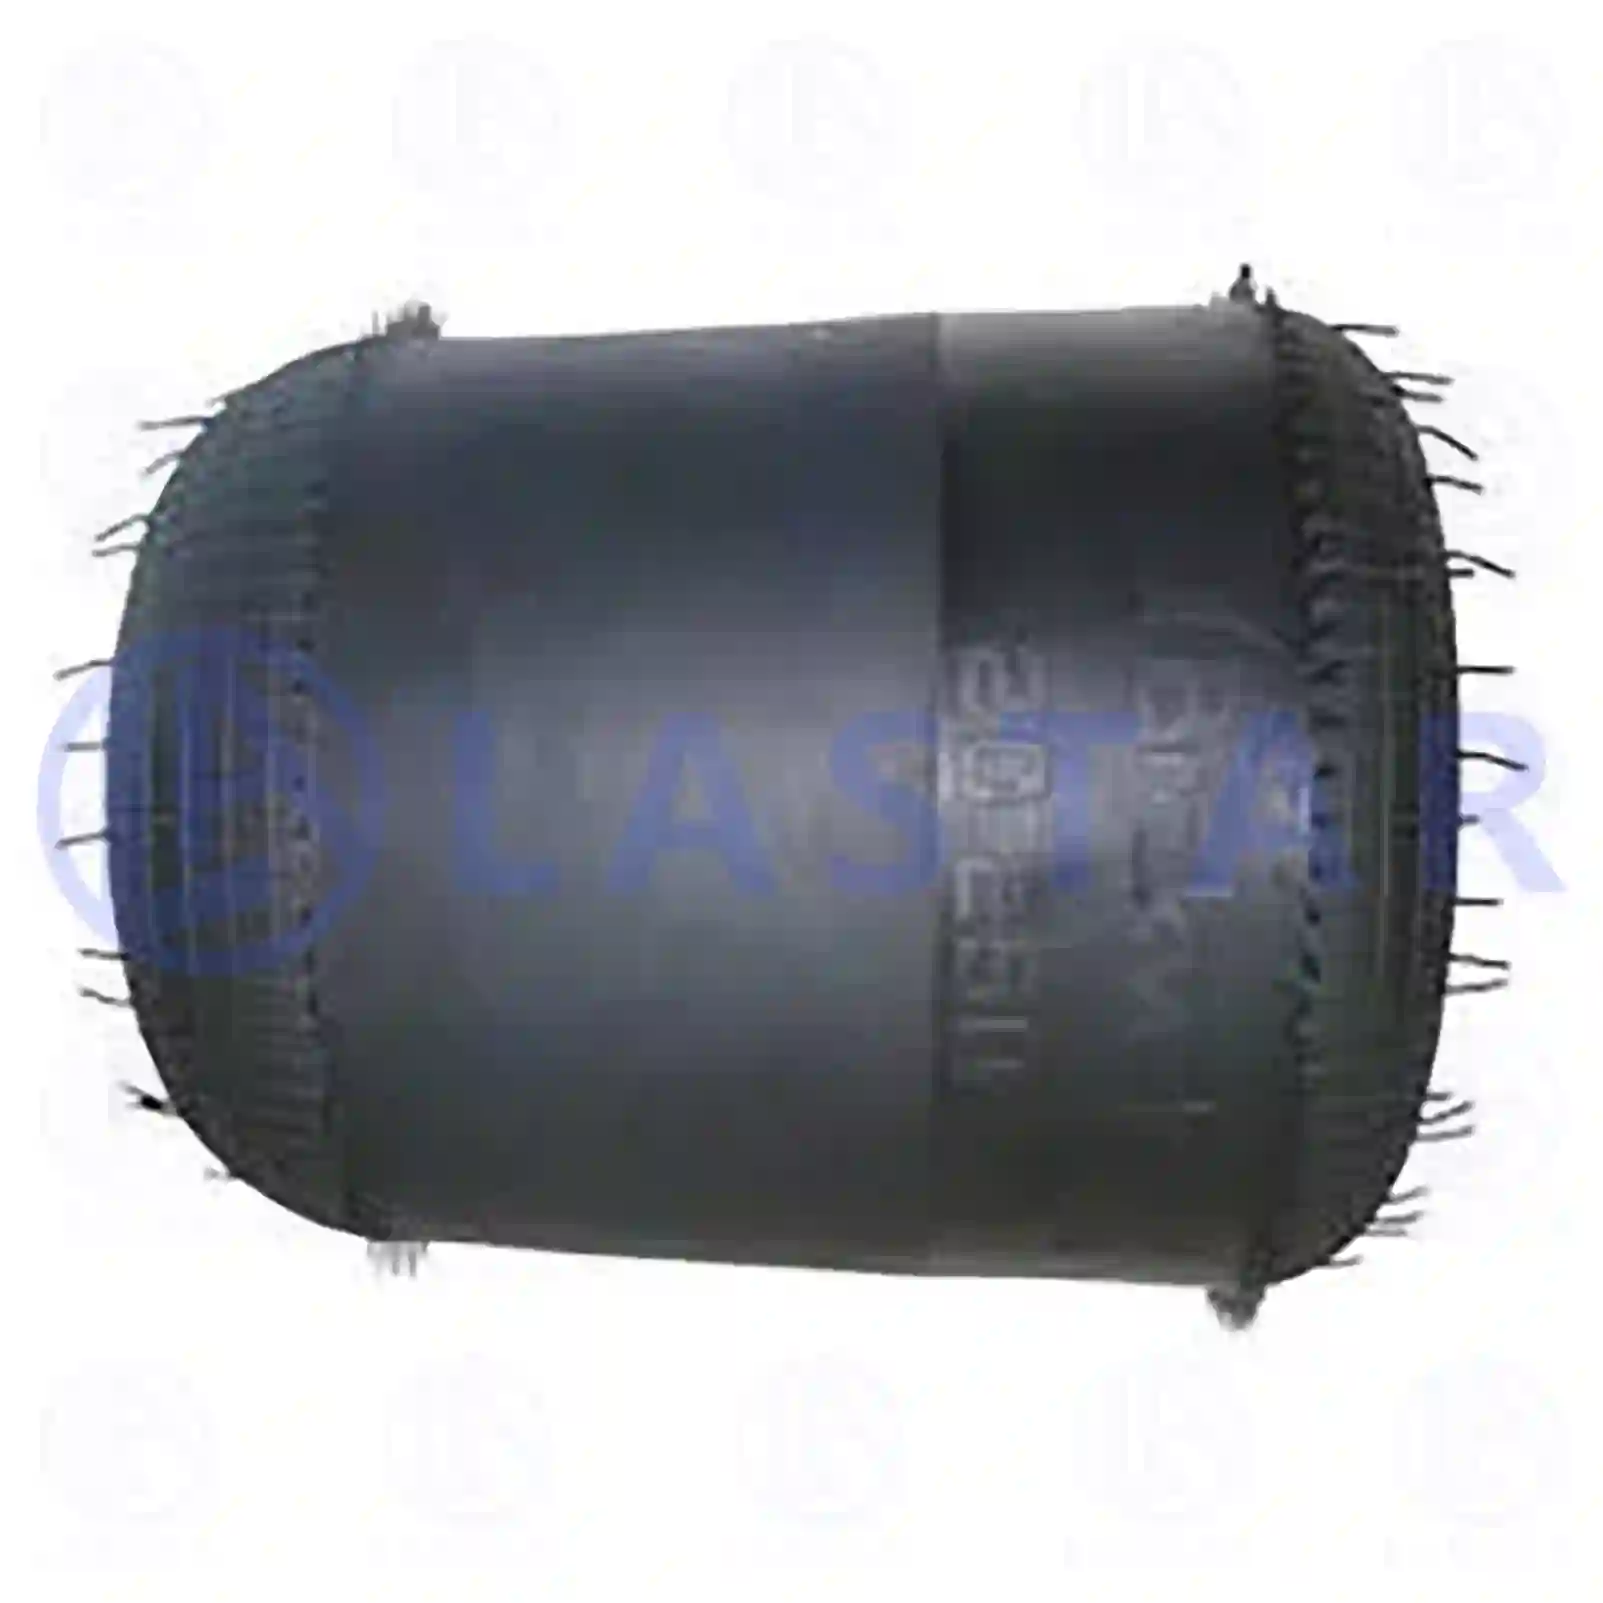 Air spring, without piston, 77729289, 41006926, ZG40838-0008 ||  77729289 Lastar Spare Part | Truck Spare Parts, Auotomotive Spare Parts Air spring, without piston, 77729289, 41006926, ZG40838-0008 ||  77729289 Lastar Spare Part | Truck Spare Parts, Auotomotive Spare Parts